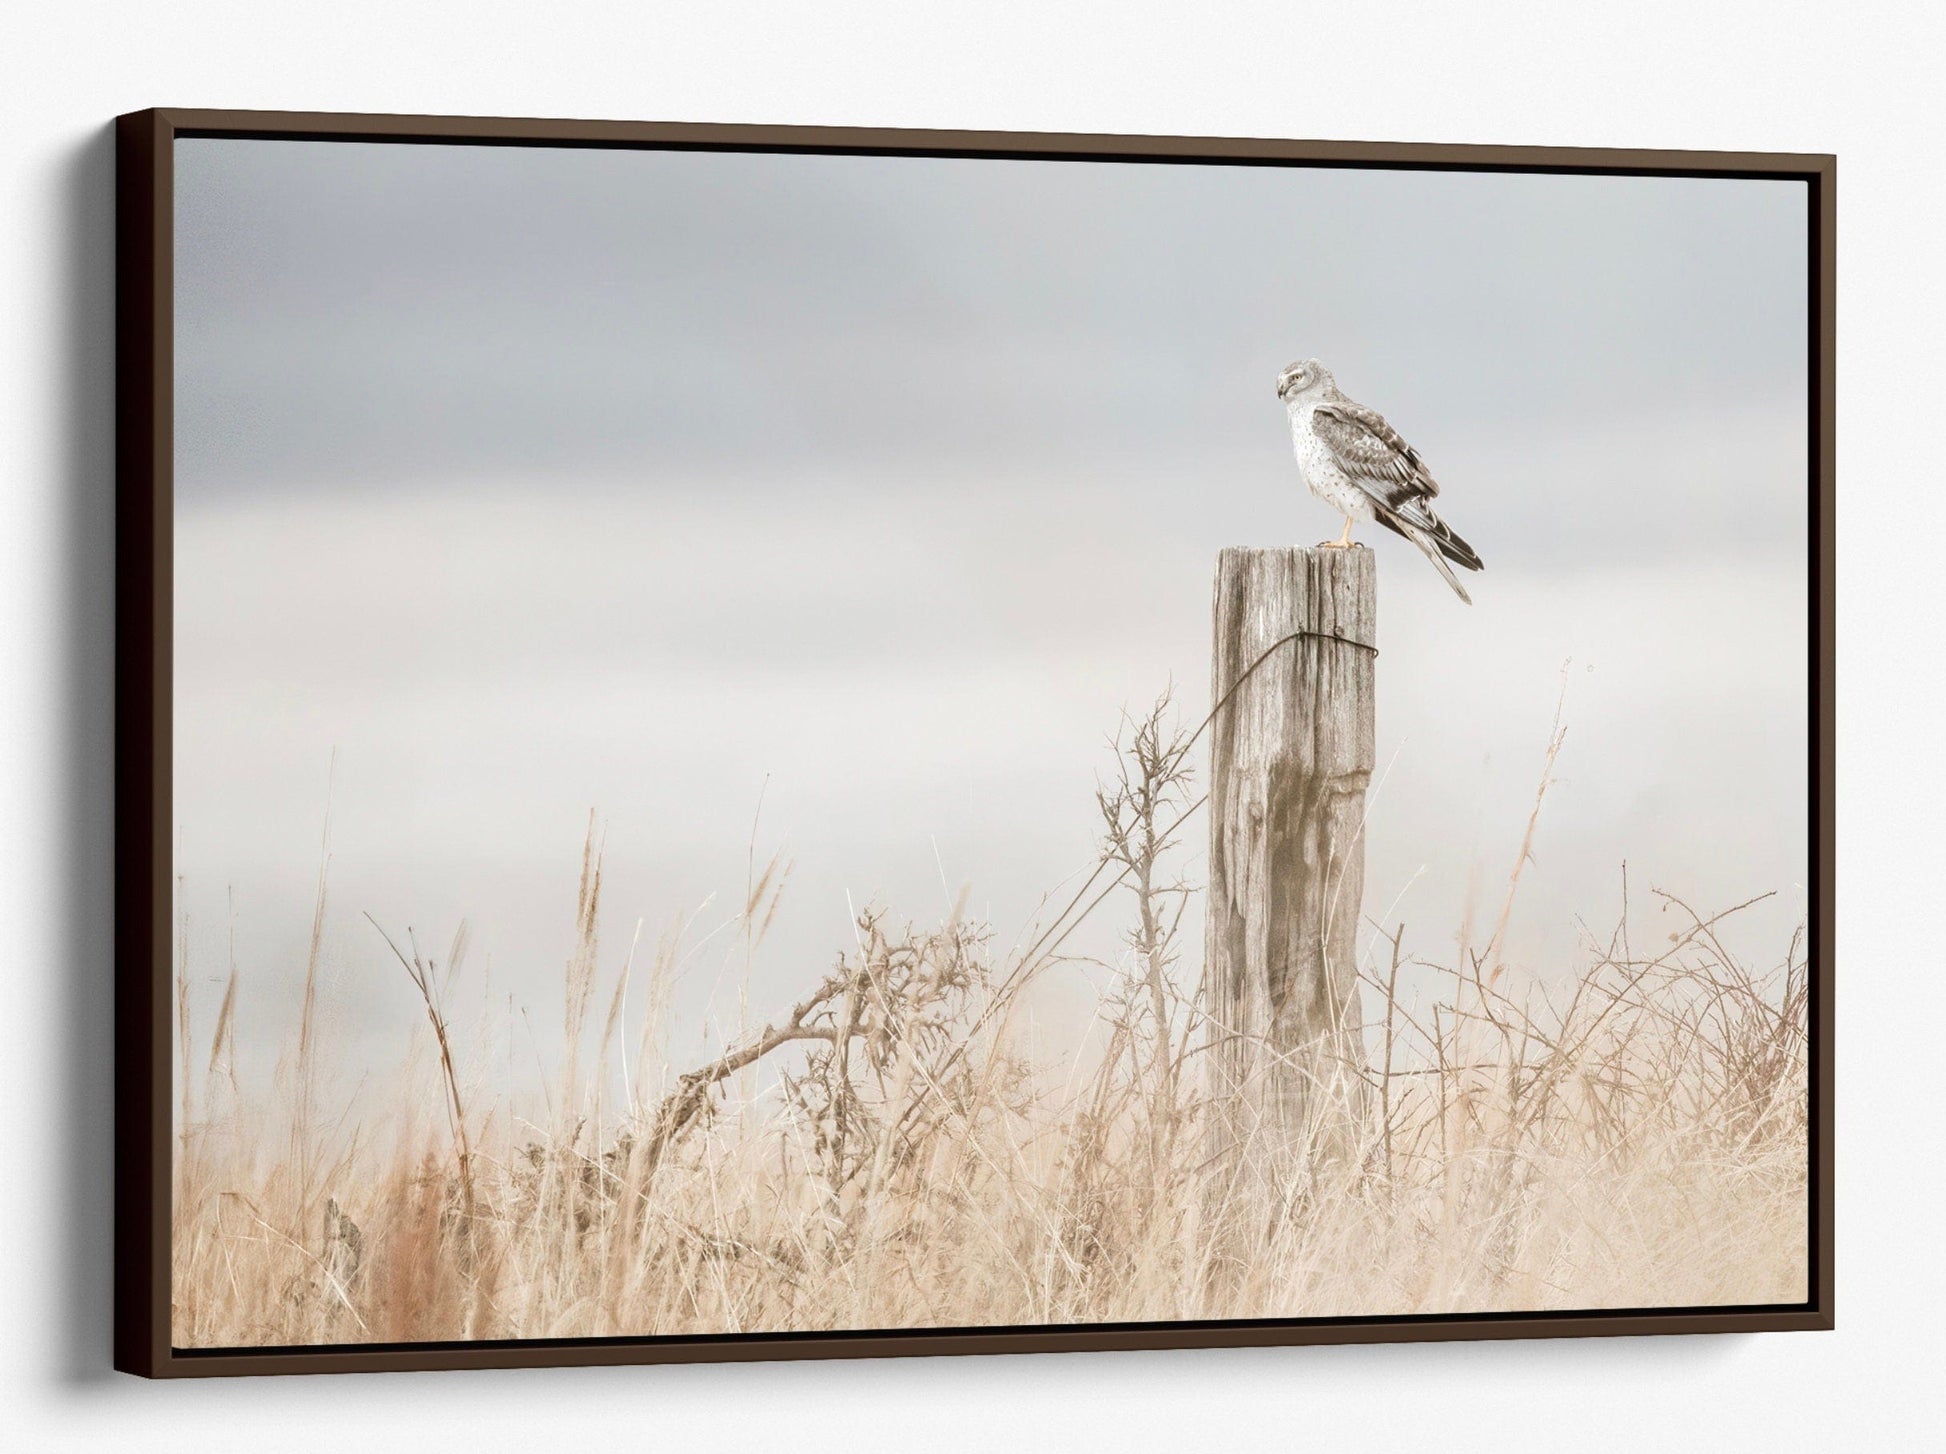 Northern Harrier Hawk on Fence Canvas-Walnut Frame / 12 x 18 Inches Wall Art Teri James Photography